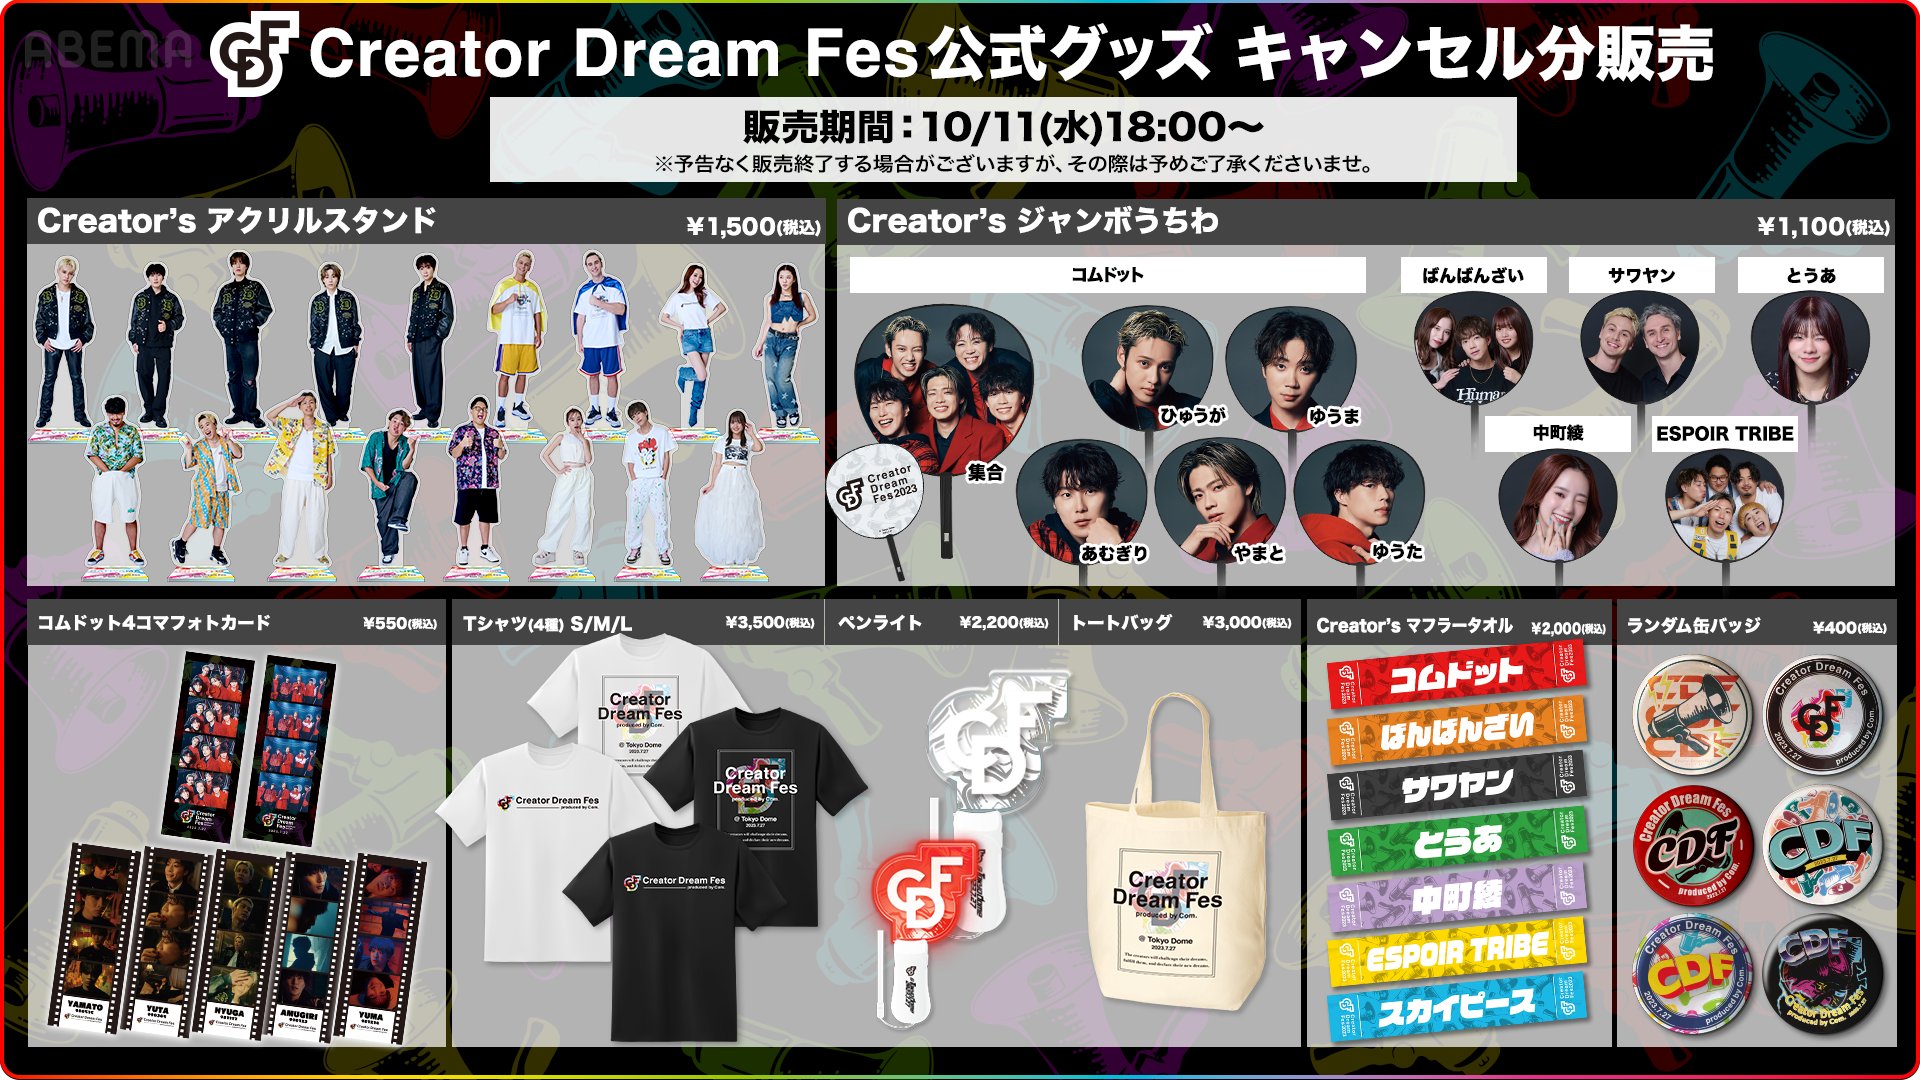 Creator Dream Fes 〜produced by Com.〜 at 東京ドーム【公式 